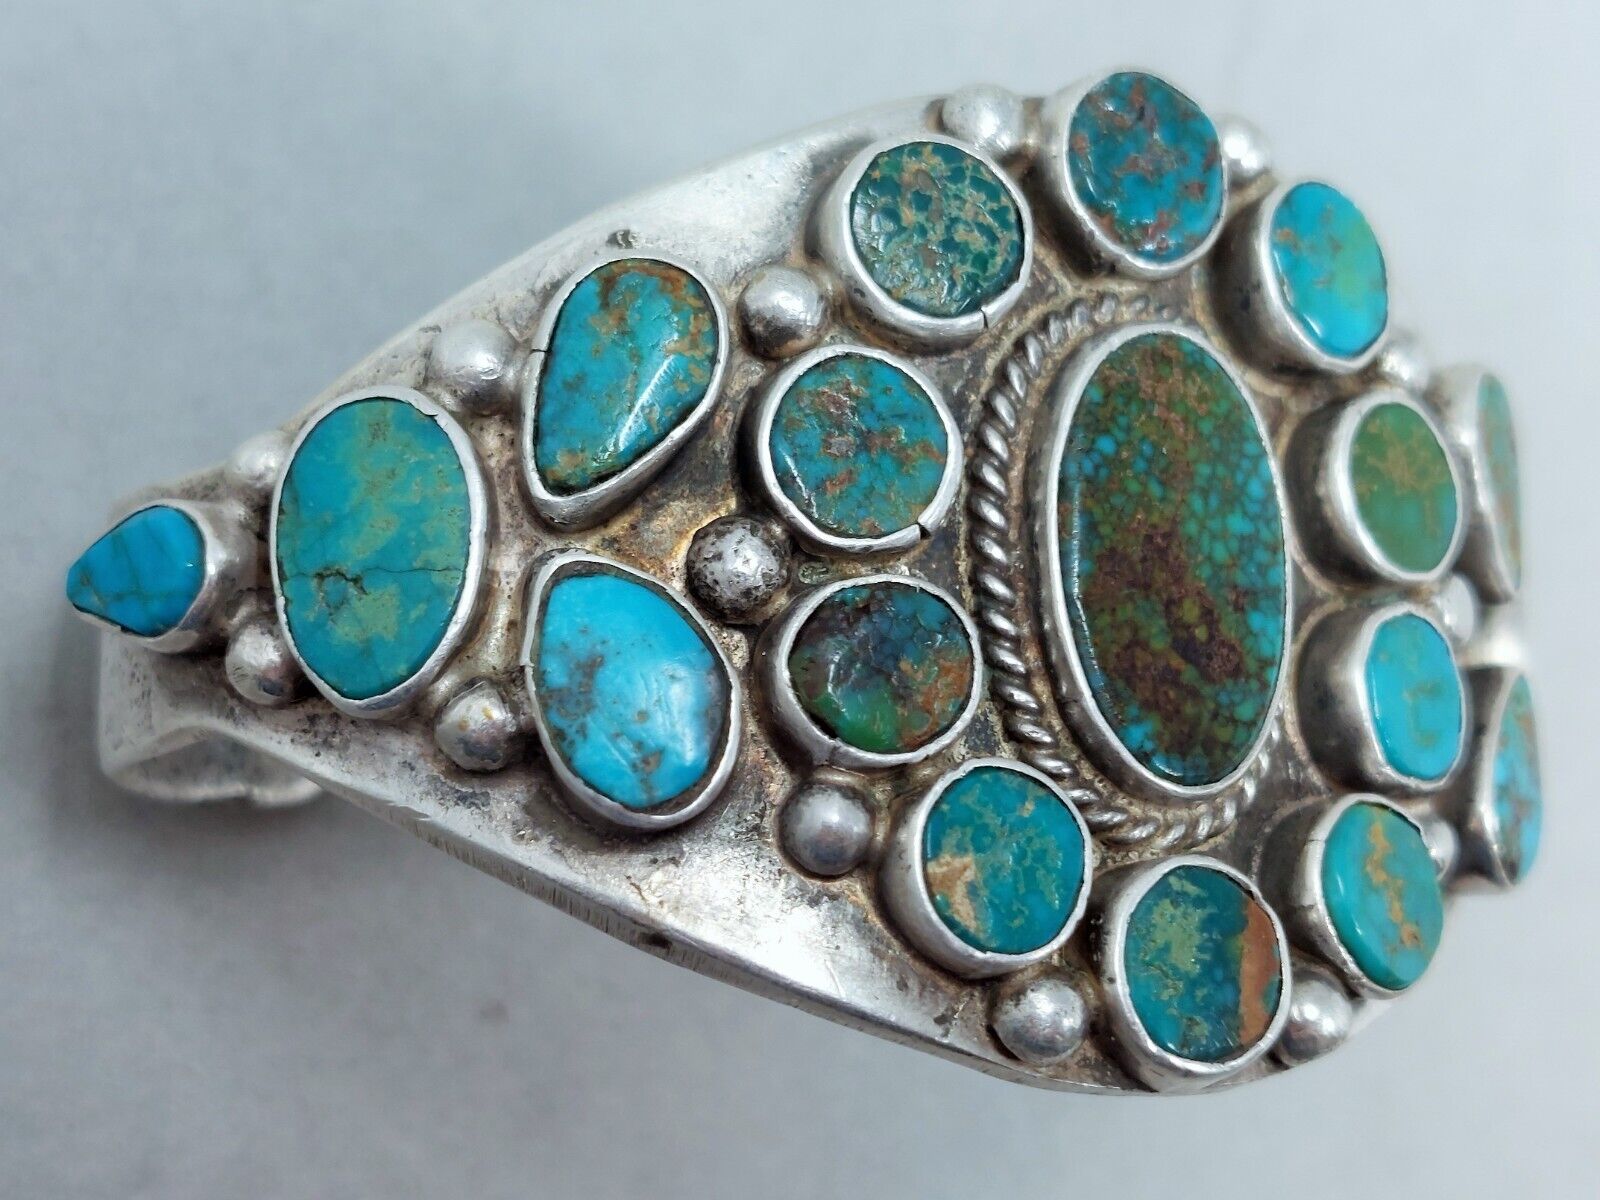 Classic Vintage Handwrought Navajo Silver Multi-stone Turquoise Cuff